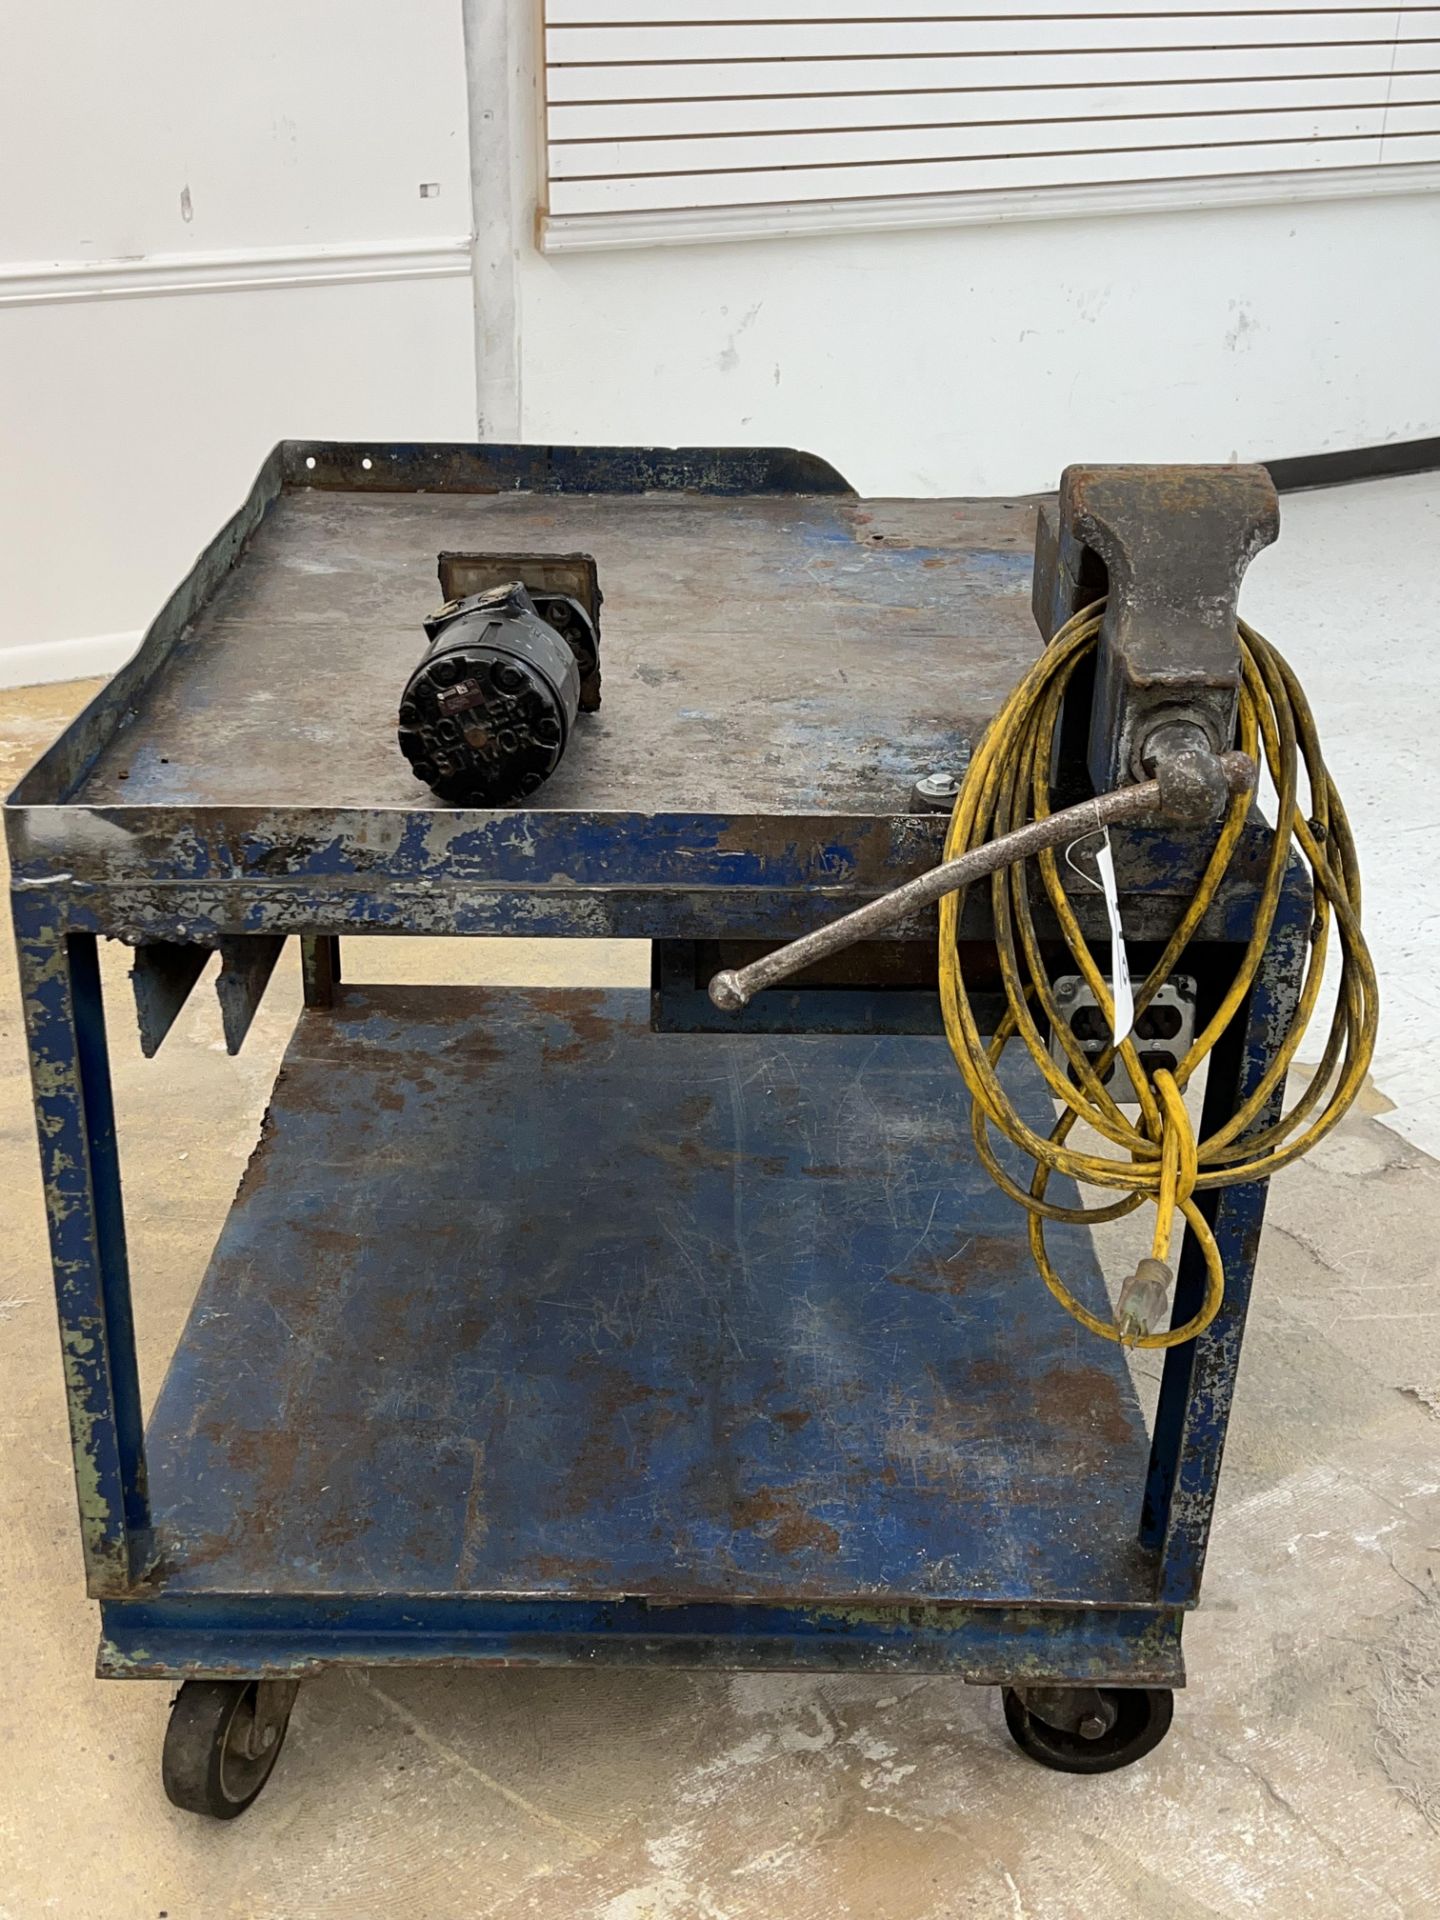 Heavy Duty Table With Vise - Image 2 of 4